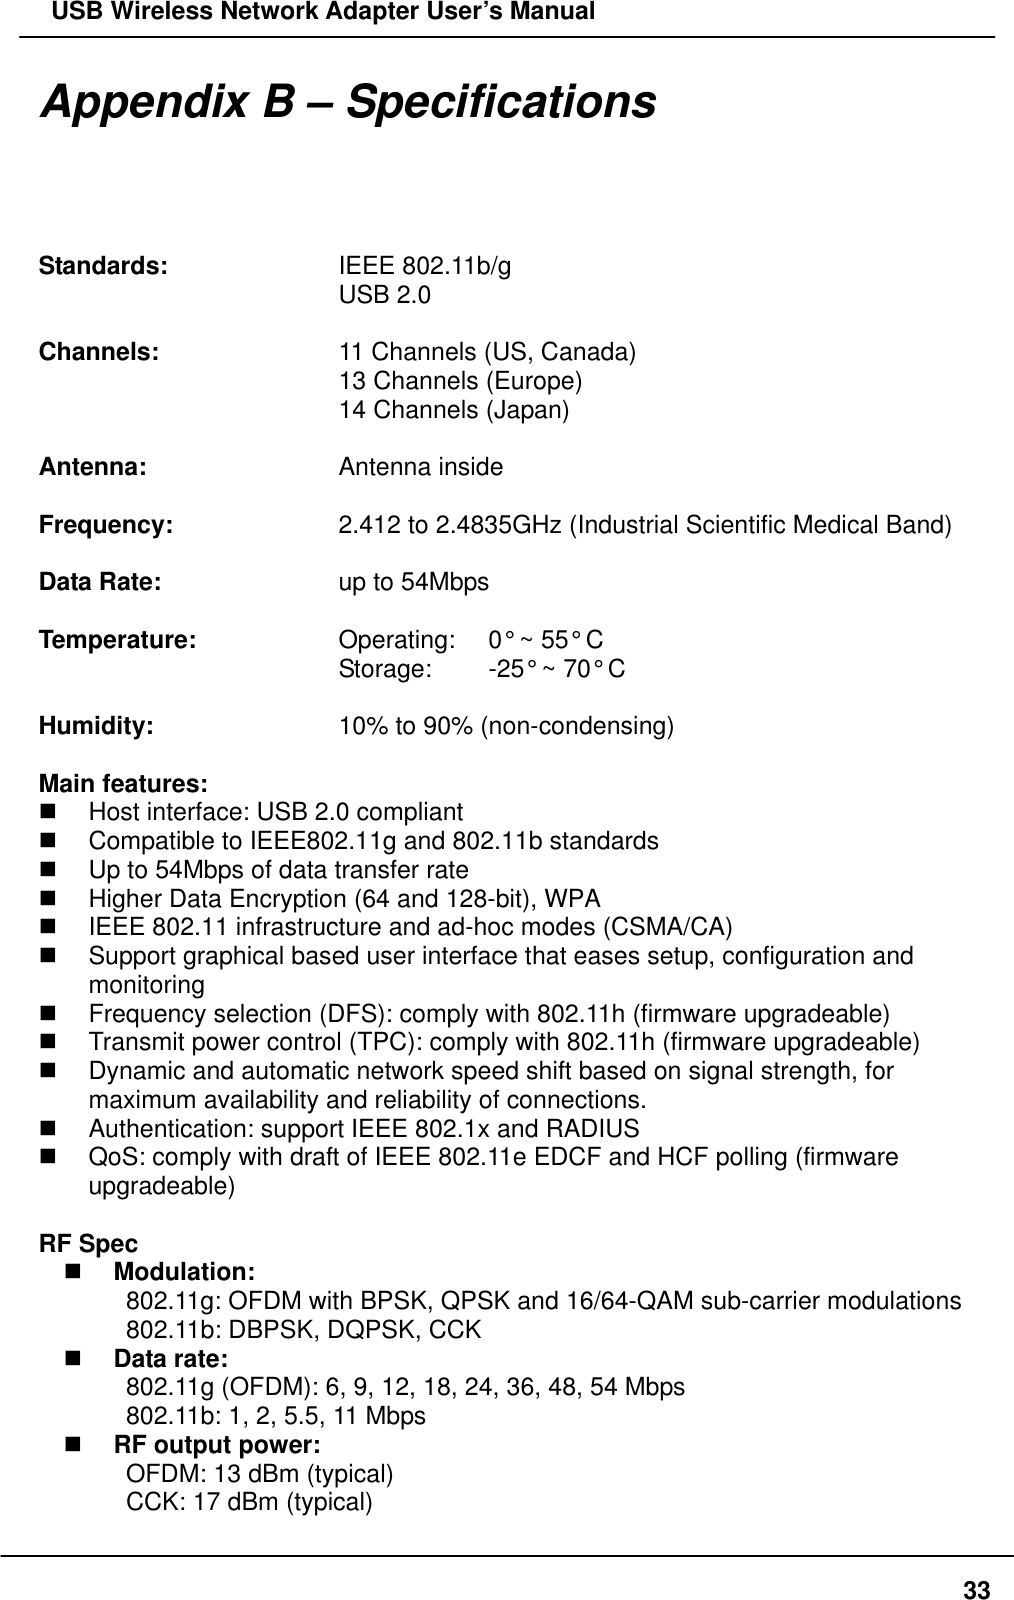   USB Wireless Network Adapter User’s Manual Appendix B – Specifications Standards:    IEEE 802.11b/g       USB 2.0  Channels:    11 Channels (US, Canada)       13 Channels (Europe)       14 Channels (Japan)  Antenna:    Antenna inside  Frequency:    2.412 to 2.4835GHz (Industrial Scientific Medical Band)  Data Rate:    up to 54Mbps       Temperature:      Operating:    0° ~ 55° C       Storage:  -25° ~ 70° C  Humidity:    10% to 90% (non-condensing)  Main features:   Host interface: USB 2.0 compliant   Compatible to IEEE802.11g and 802.11b standards   Up to 54Mbps of data transfer rate   Higher Data Encryption (64 and 128-bit), WPA     IEEE 802.11 infrastructure and ad-hoc modes (CSMA/CA)   Support graphical based user interface that eases setup, configuration and monitoring   Frequency selection (DFS): comply with 802.11h (firmware upgradeable)   Transmit power control (TPC): comply with 802.11h (firmware upgradeable)   Dynamic and automatic network speed shift based on signal strength, for maximum availability and reliability of connections.   Authentication: support IEEE 802.1x and RADIUS   QoS: comply with draft of IEEE 802.11e EDCF and HCF polling (firmware upgradeable)  RF Spec   Modulation: 802.11g: OFDM with BPSK, QPSK and 16/64-QAM sub-carrier modulations 802.11b: DBPSK, DQPSK, CCK   Data rate: 802.11g (OFDM): 6, 9, 12, 18, 24, 36, 48, 54 Mbps 802.11b: 1, 2, 5.5, 11 Mbps   RF output power:      OFDM: 13 dBm (typical)      CCK: 17 dBm (typical)  33